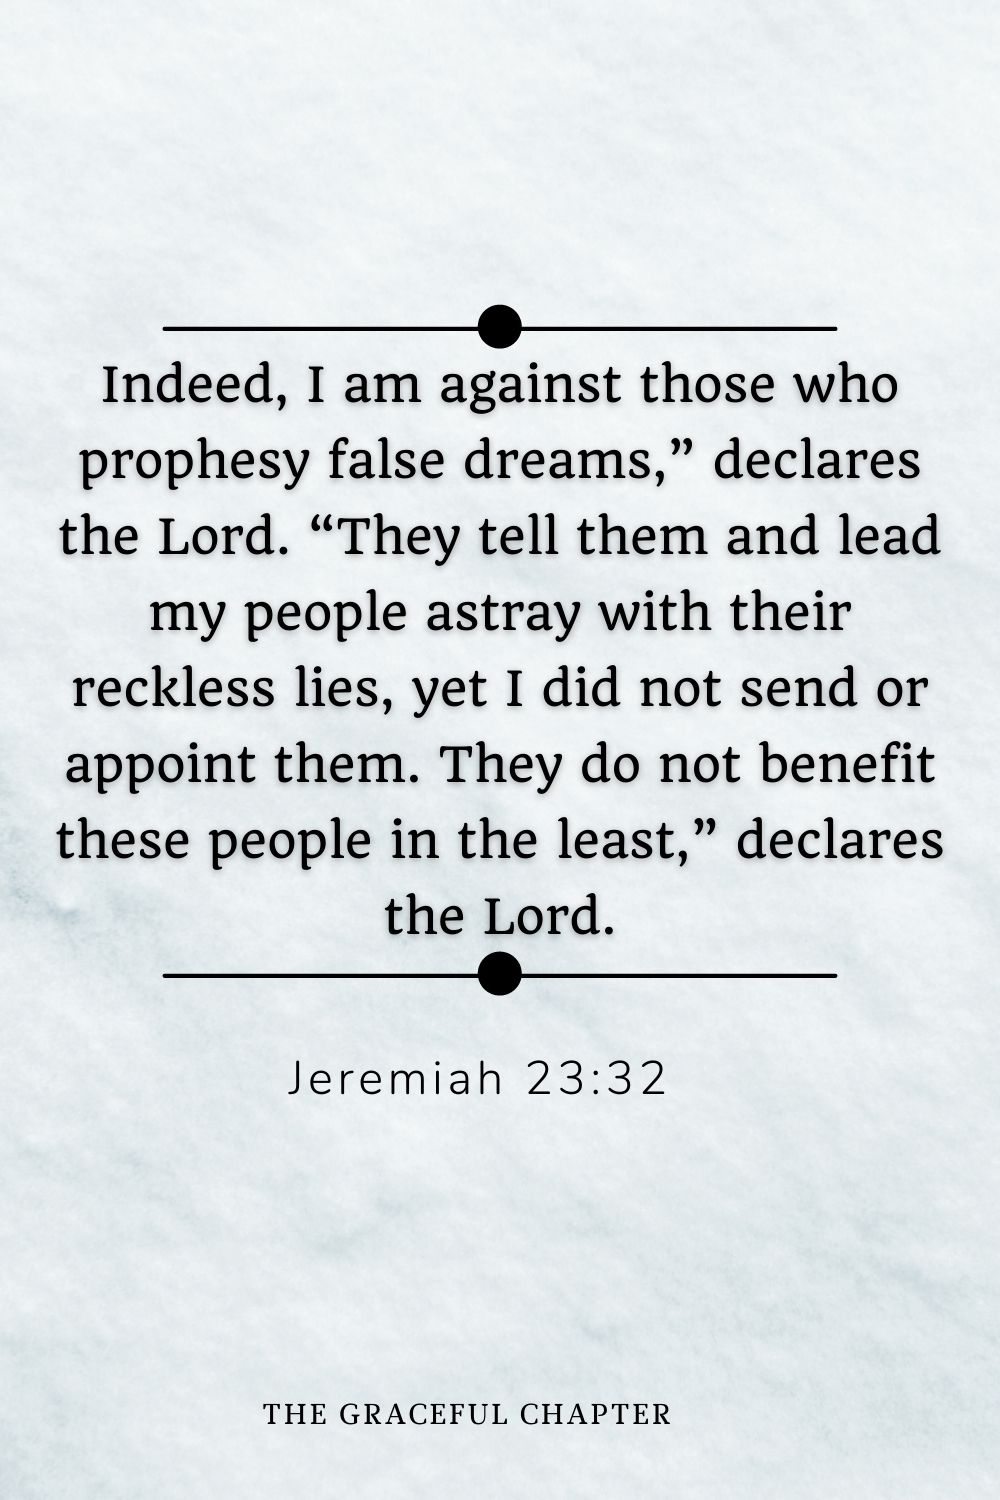 Indeed, I am against those who prophesy false dreams,” declares the Lord. “They tell them and lead my people astray with their reckless lies, yet I did not send or appoint them. They do not benefit these people in the least,” declares the Lord. Jeremiah 23:32